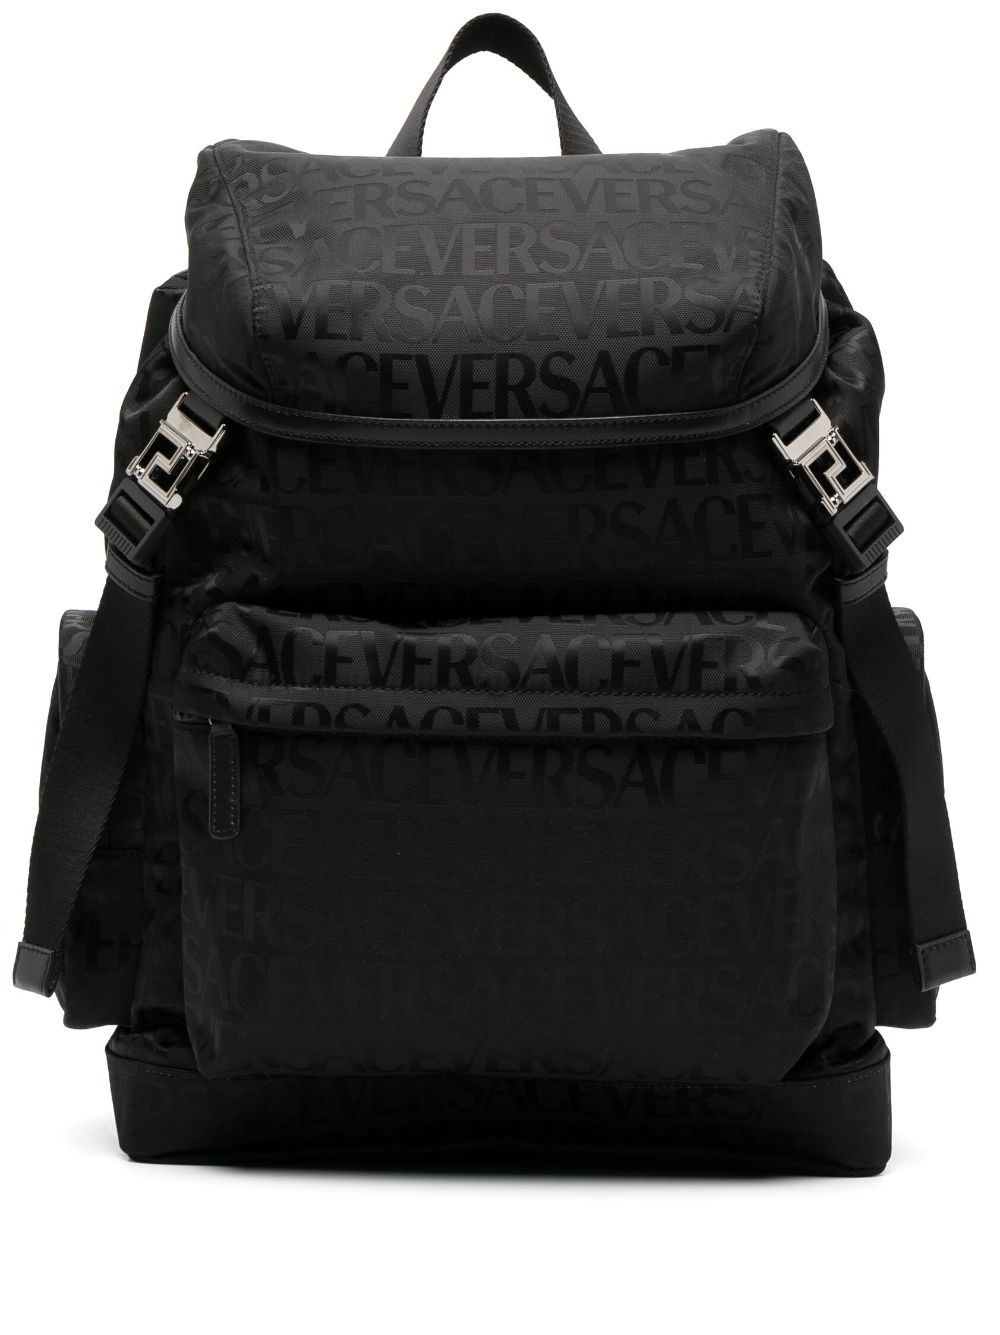 Image 1 of Versace Versace Allover Neo backpack